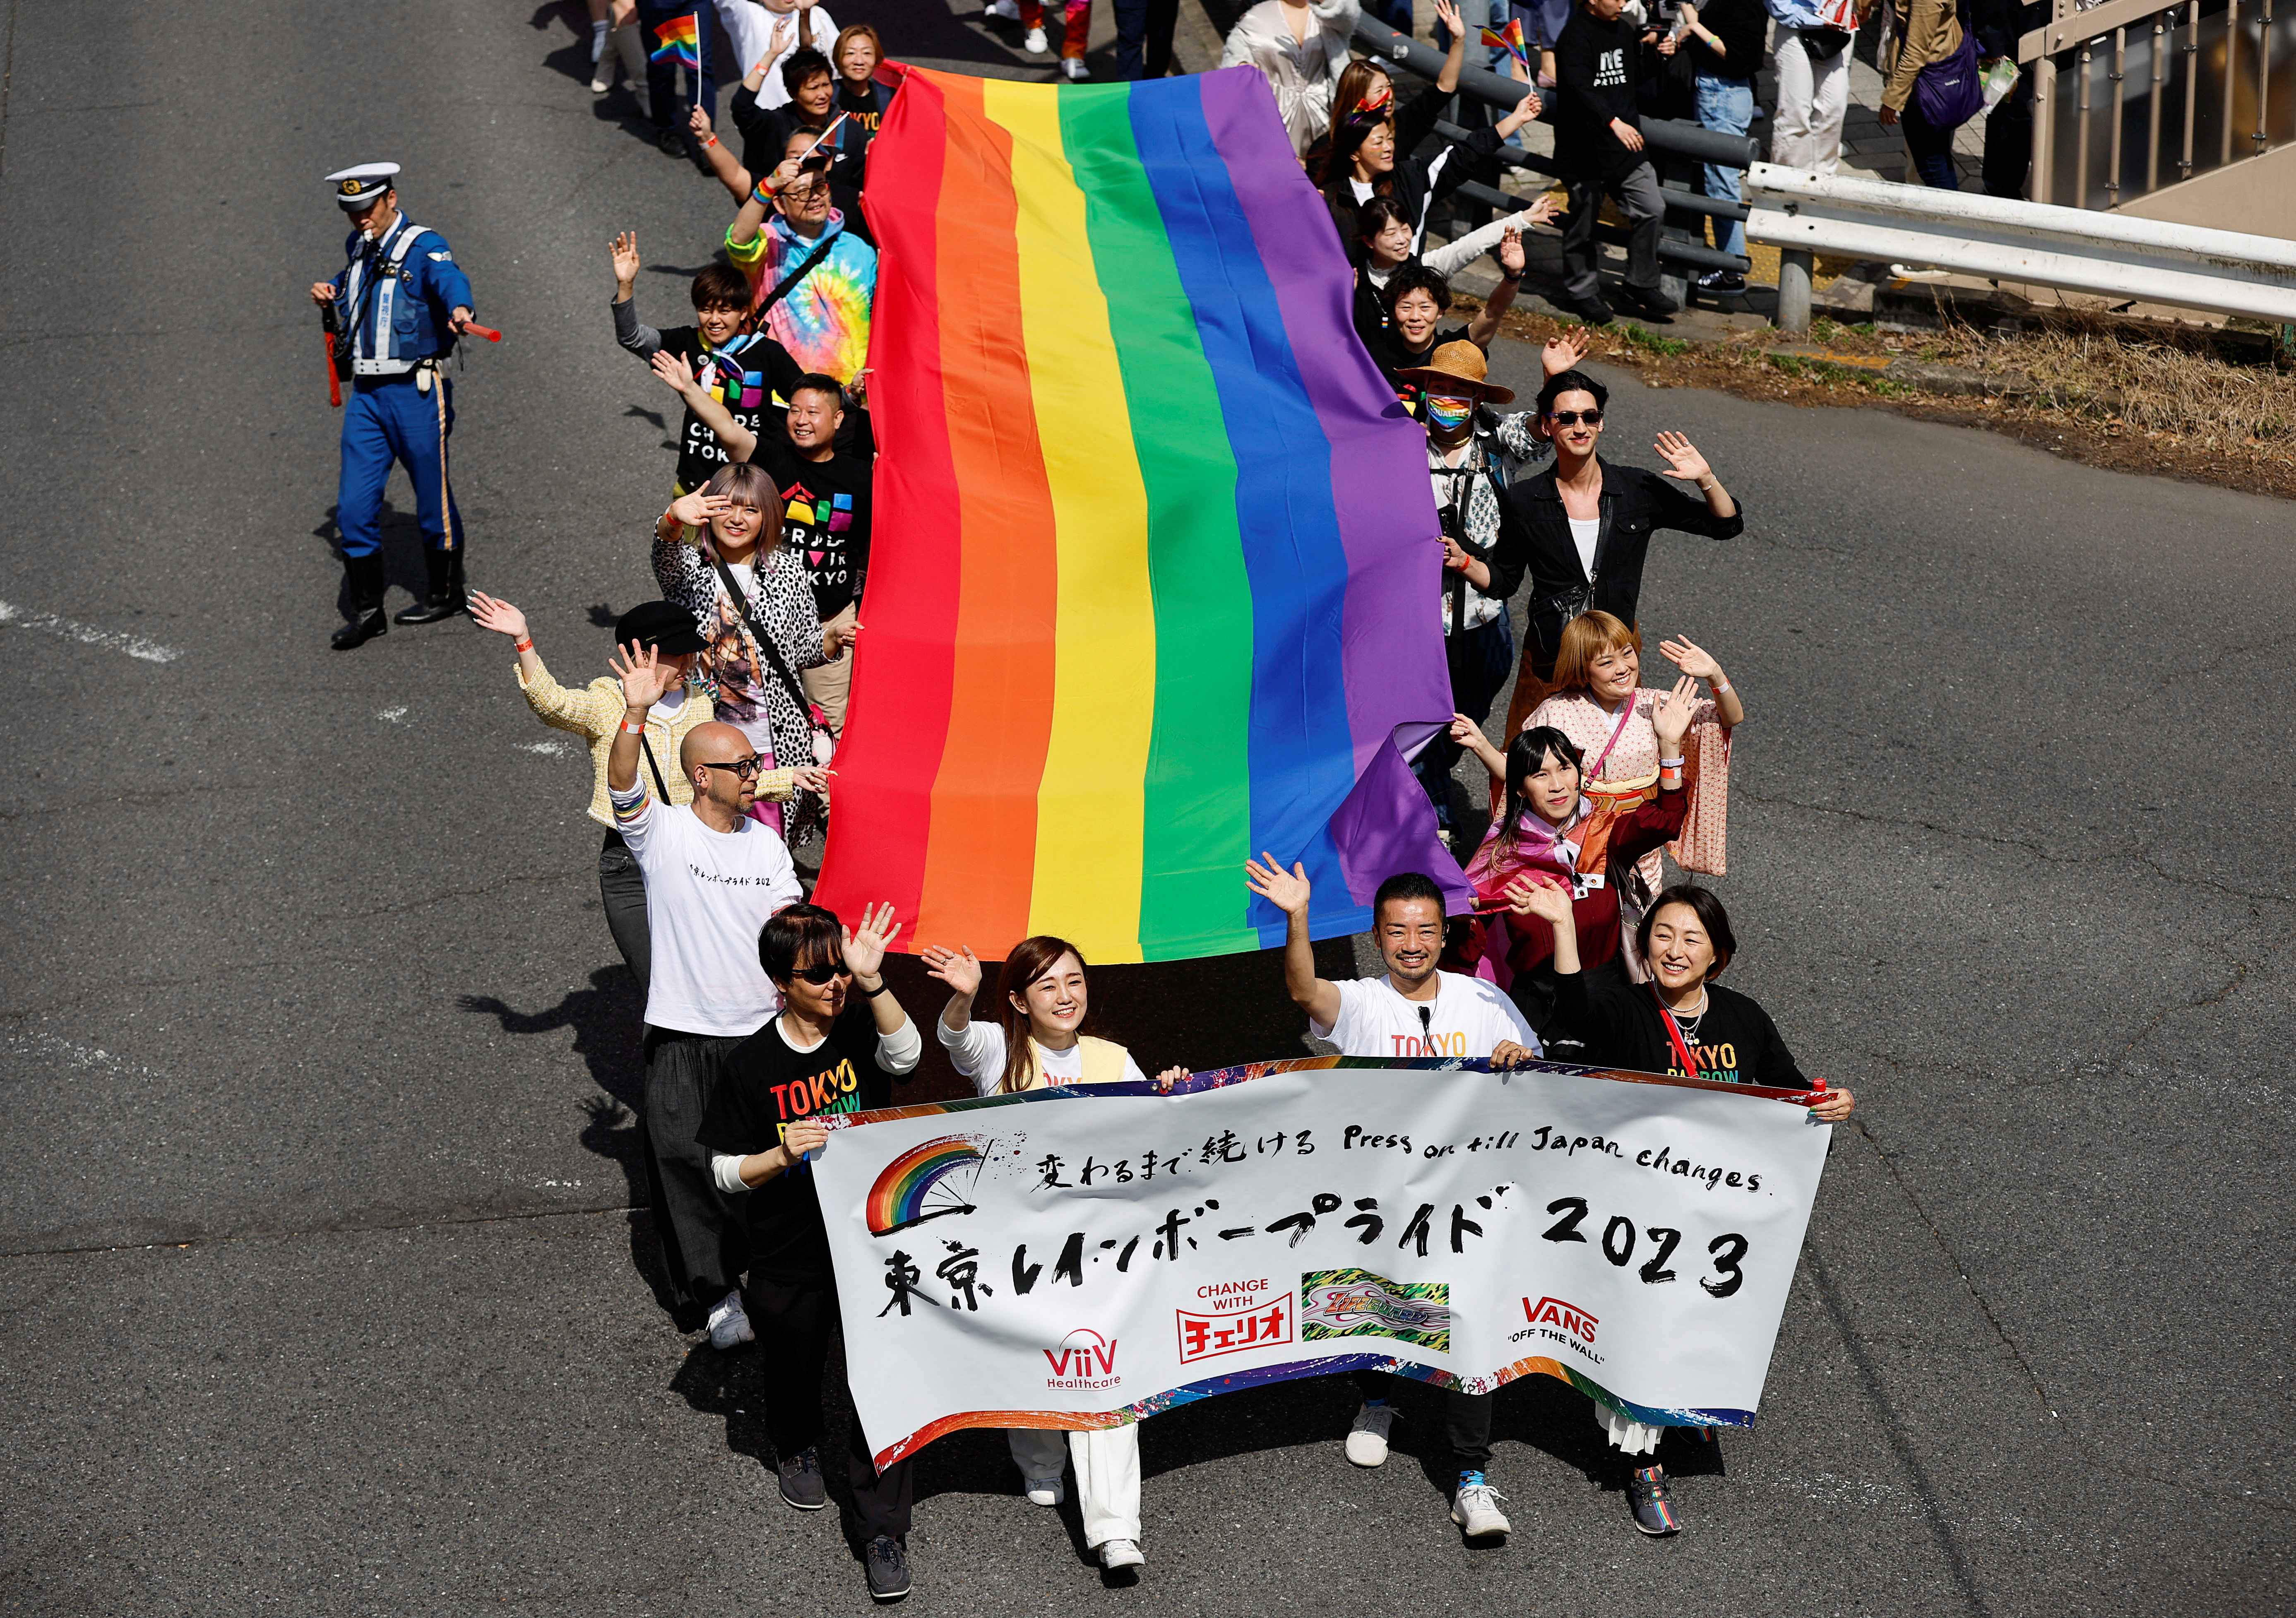 Xxnxxcomsex - Japan court rules that a bar on same-sex marriage is unconstitutional |  Reuters